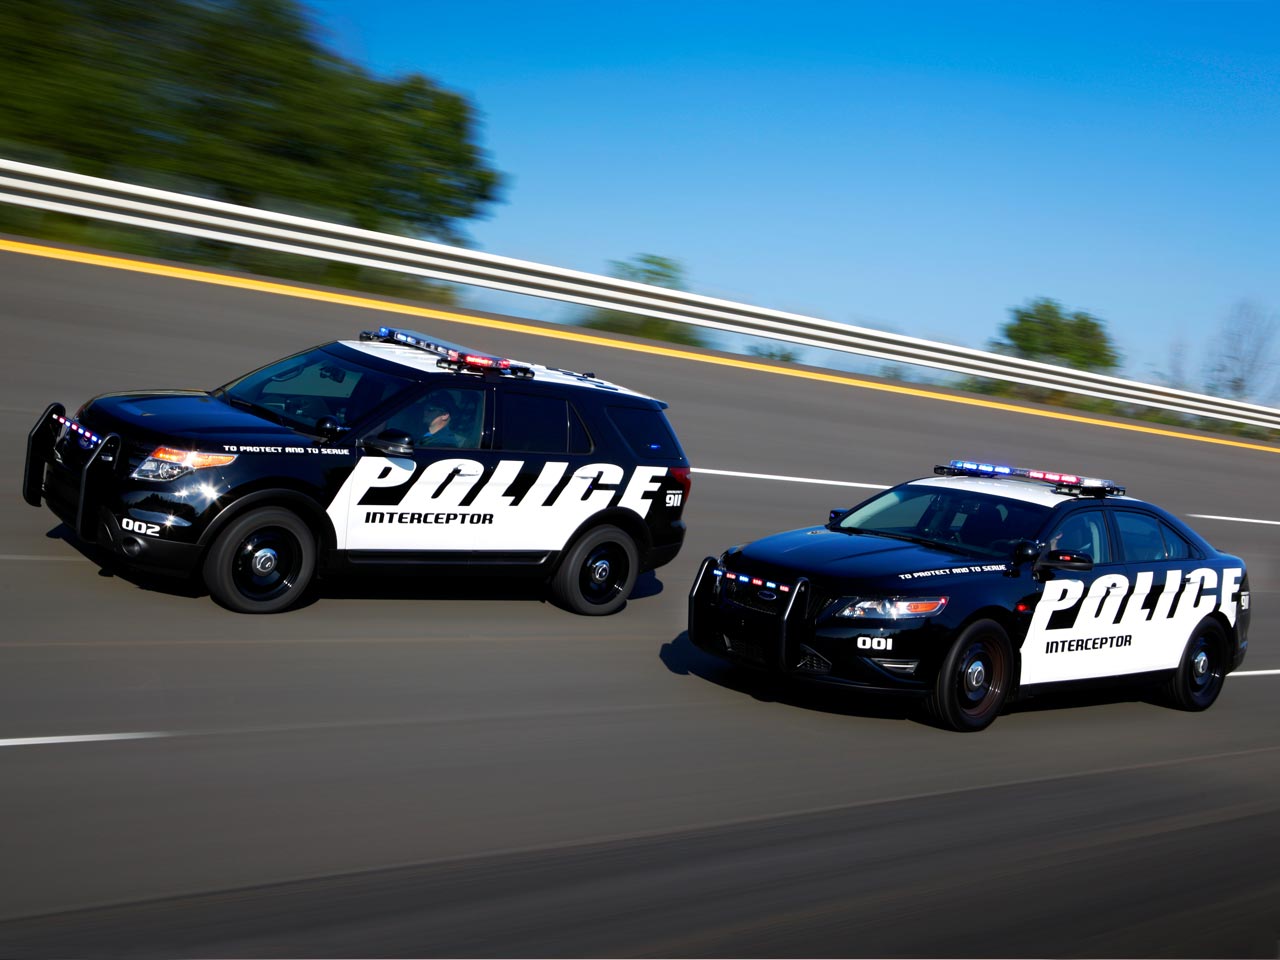 All cars are especially built to face high-speed chases